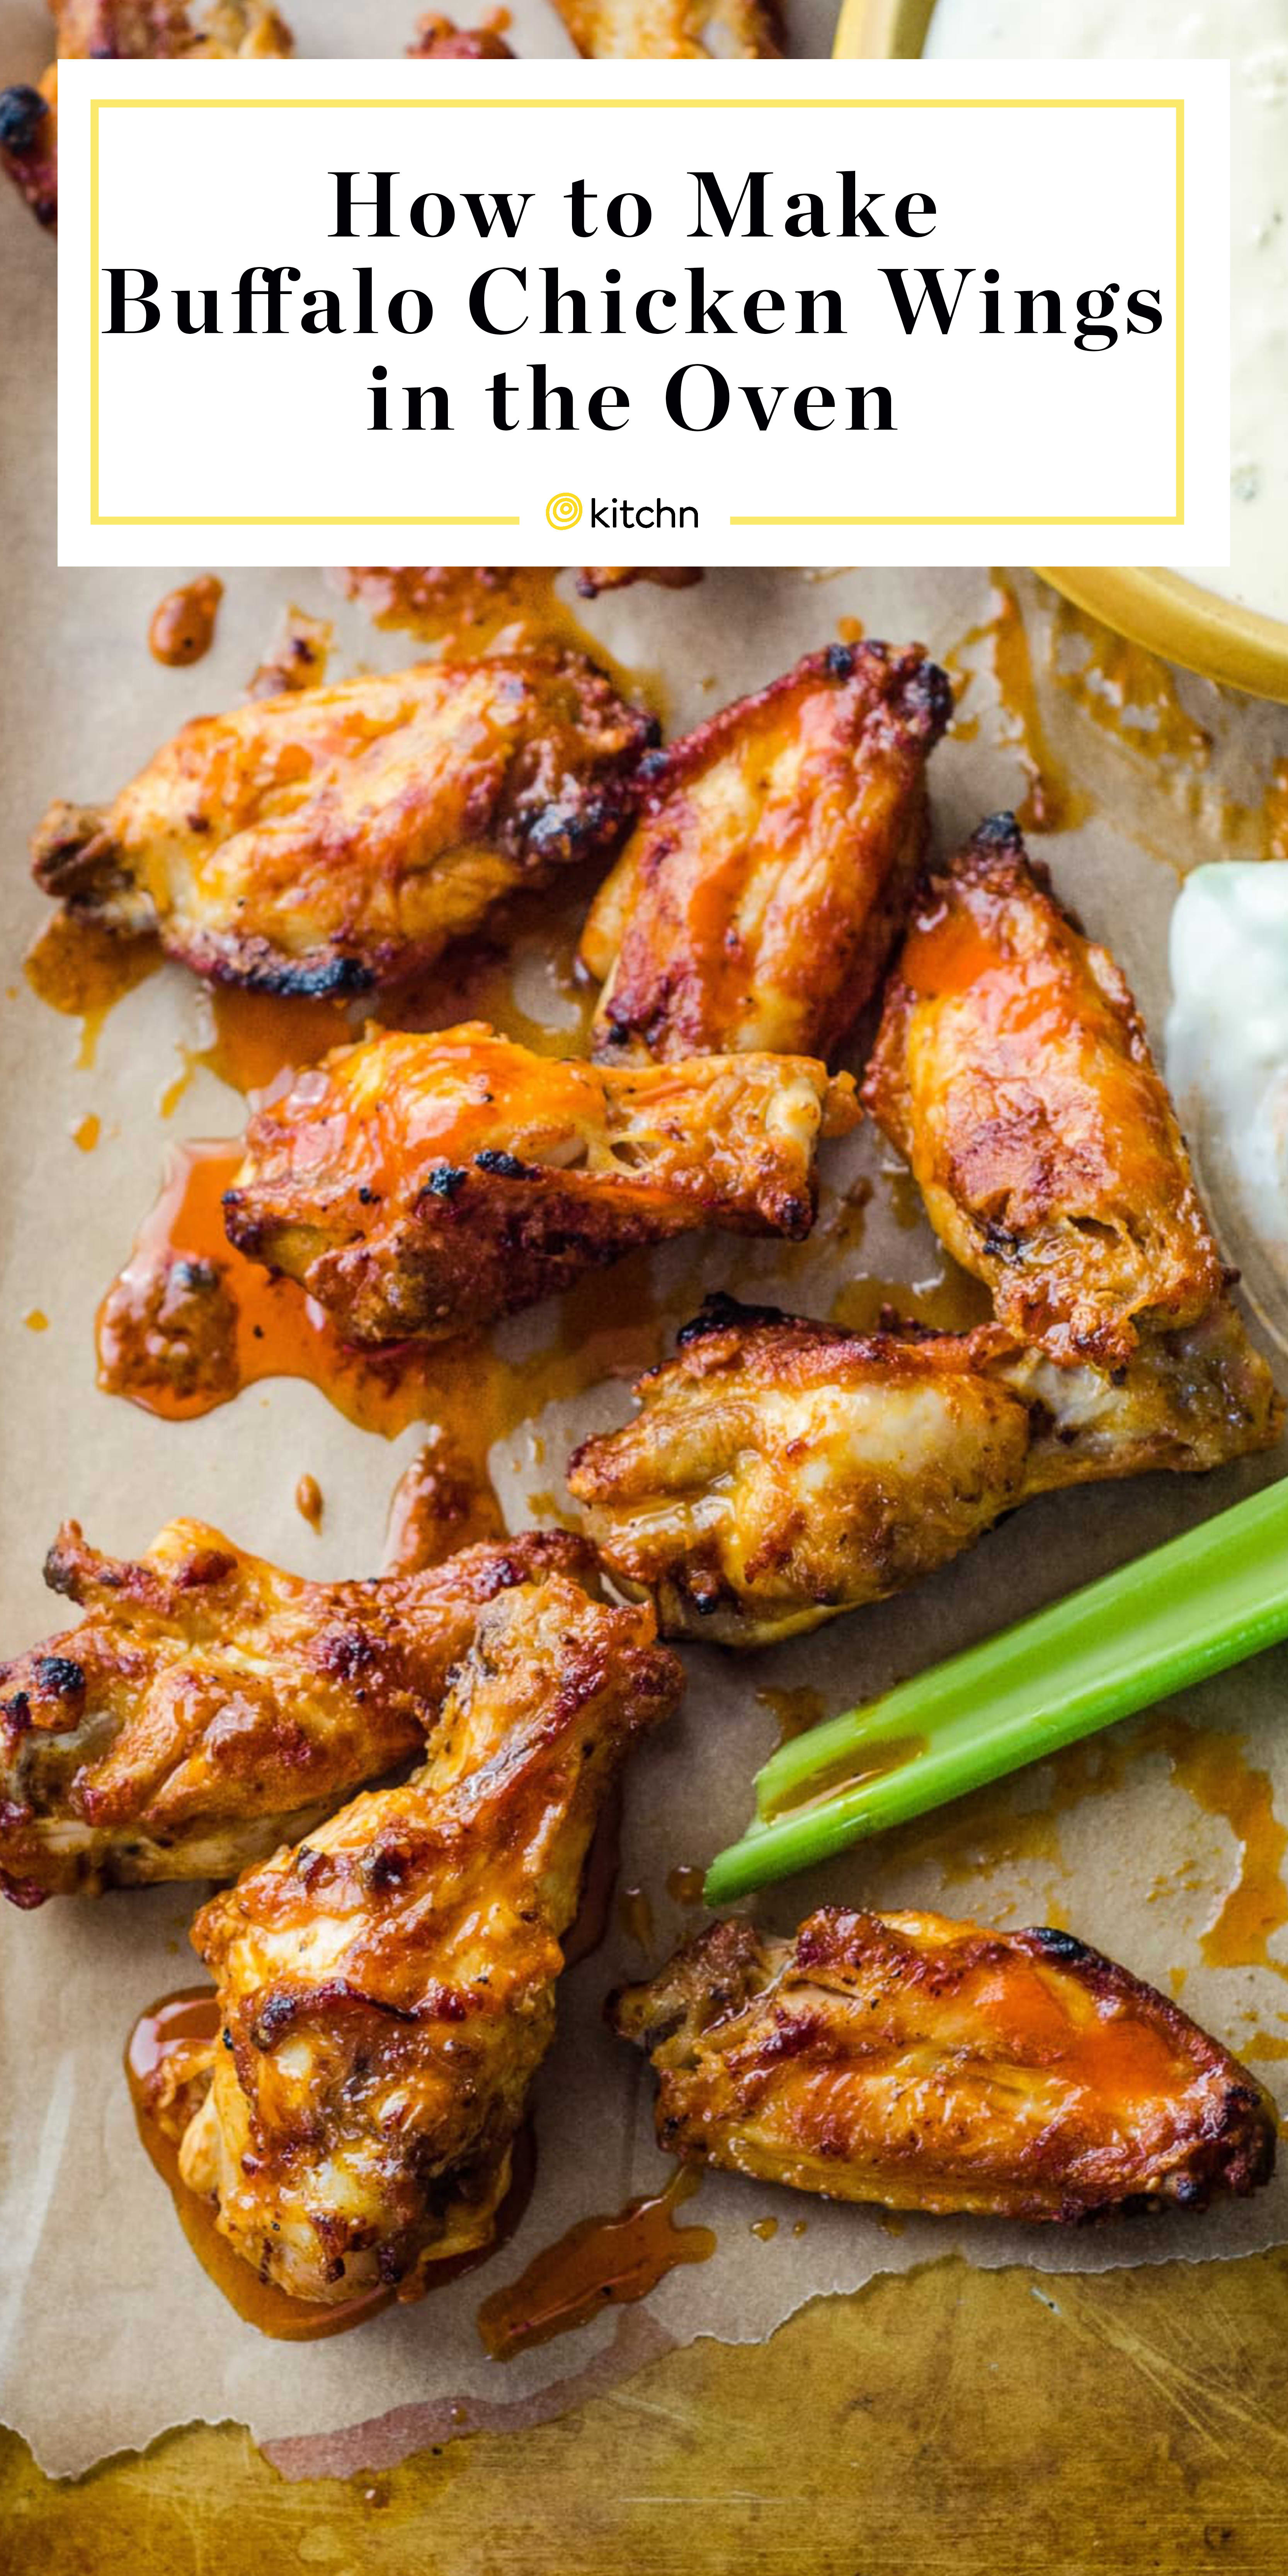 How To Make Buffalo Wings in the Oven